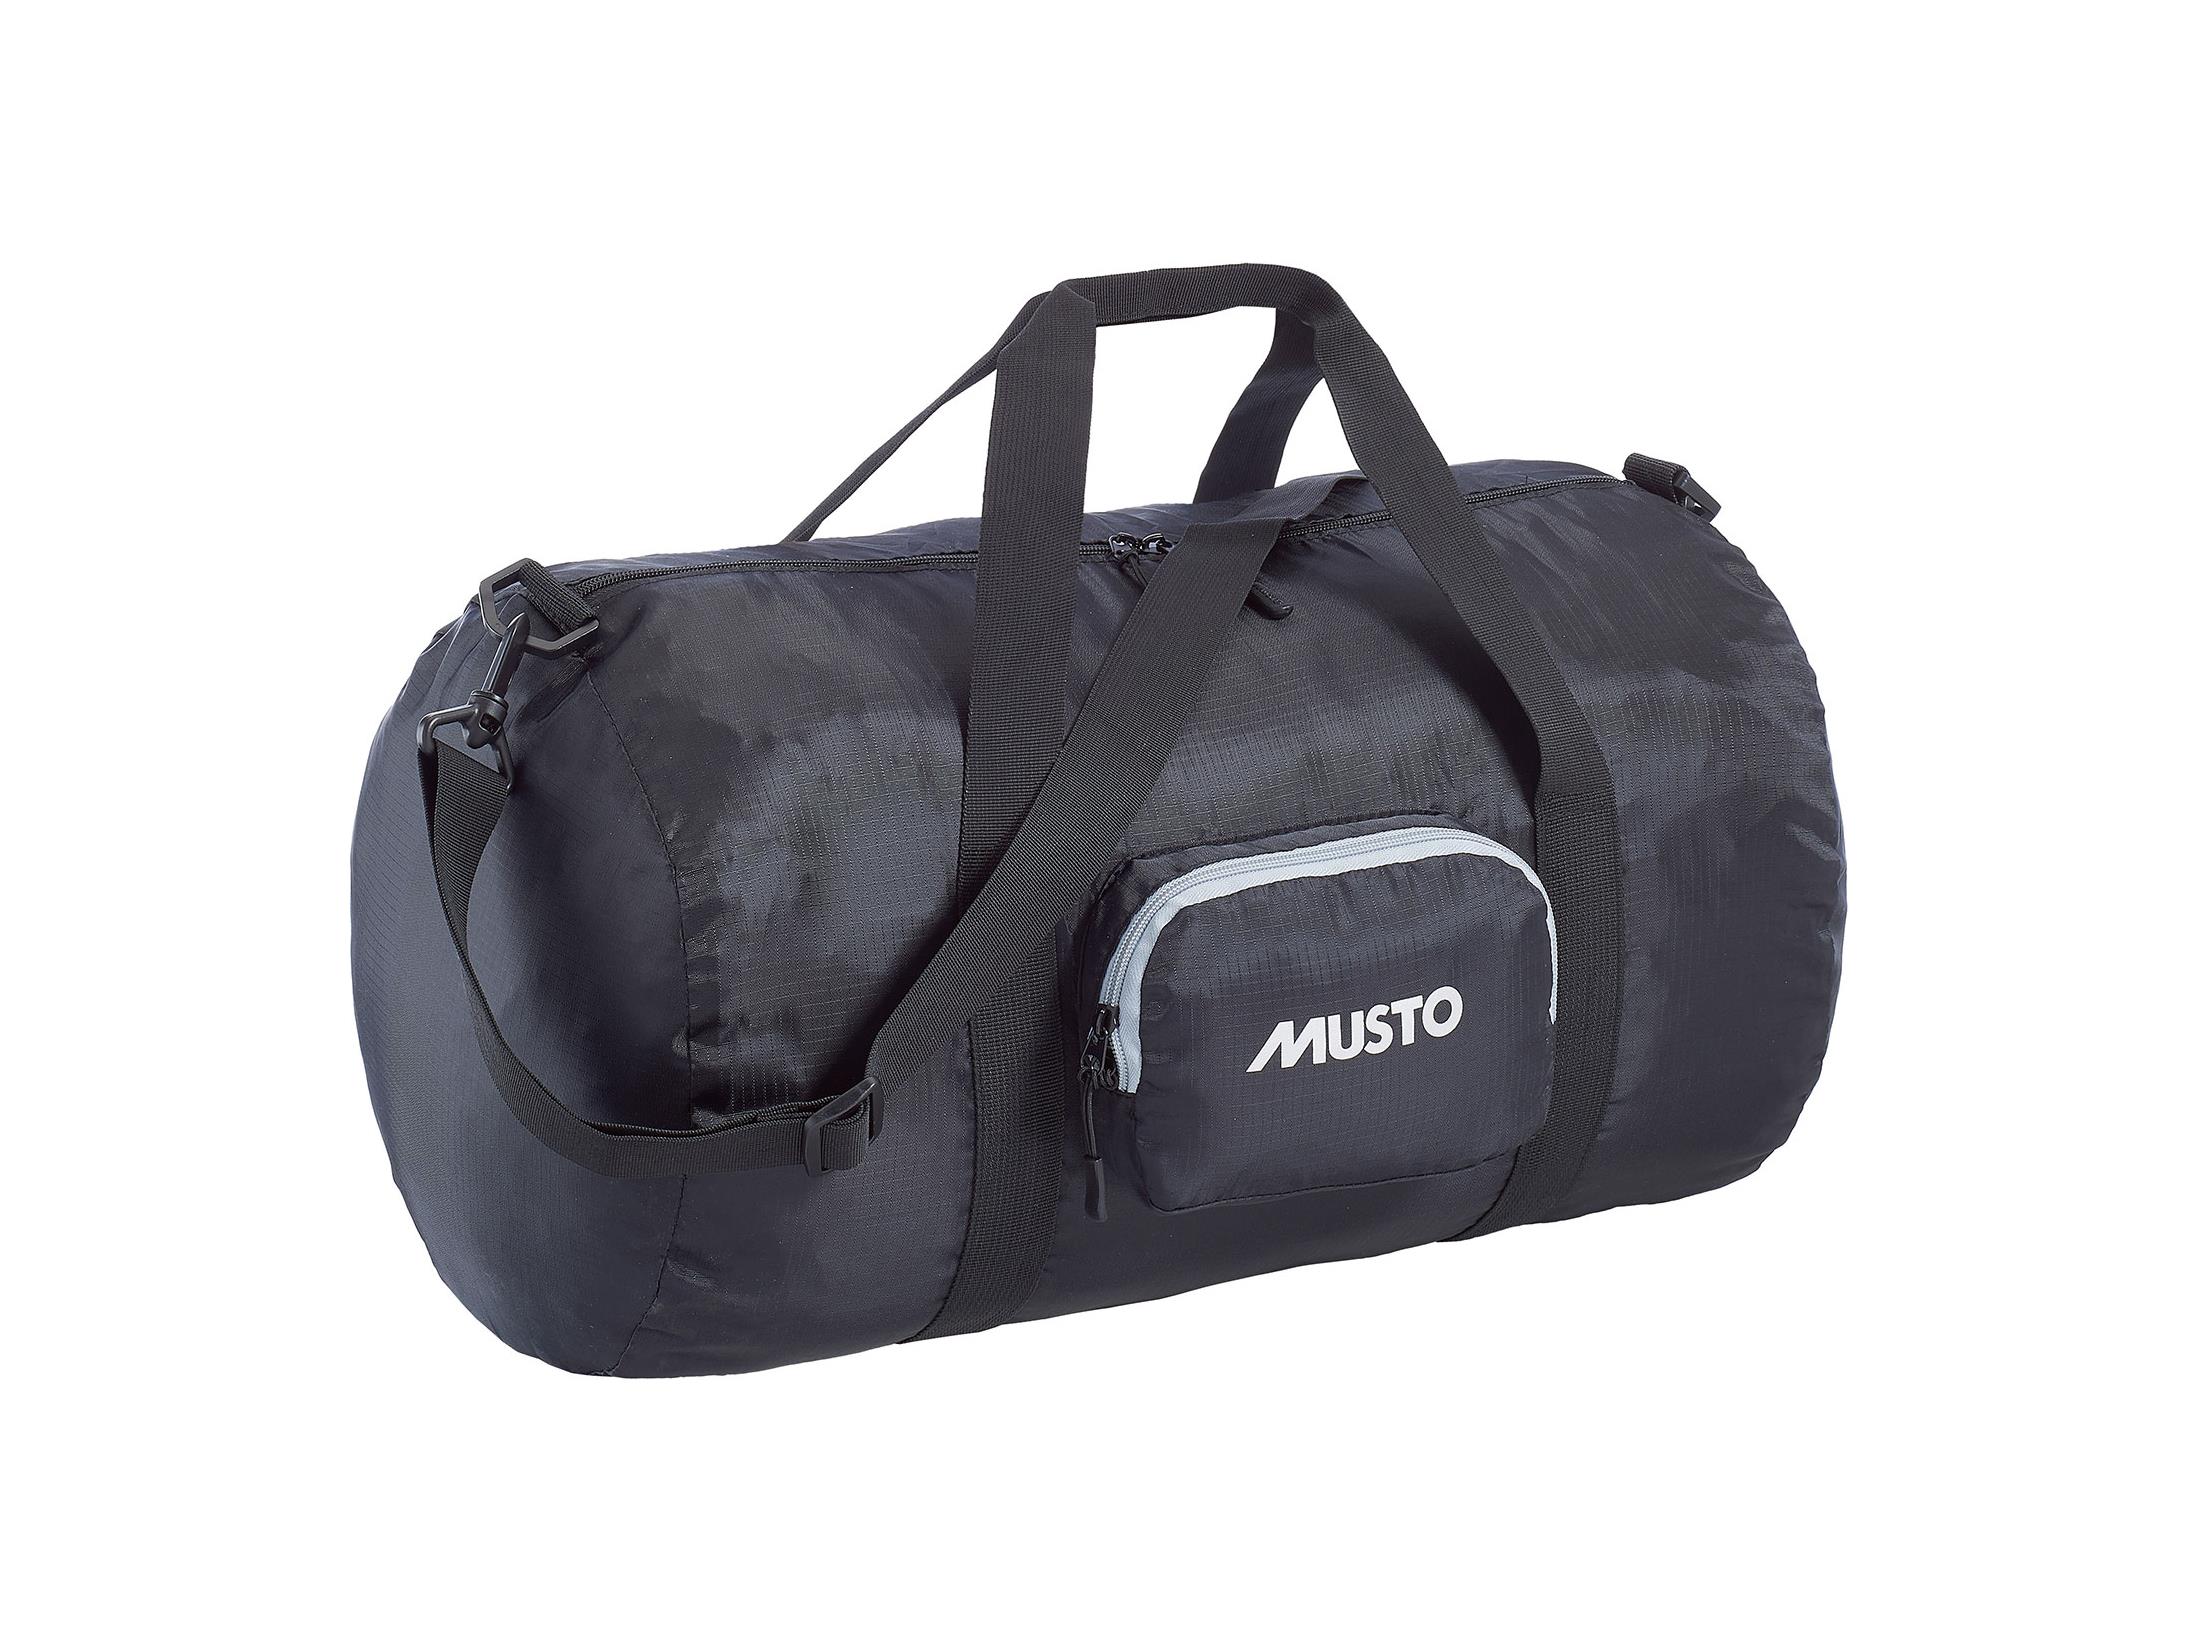 Musto 35L Packaway Holdall OutdoorGB